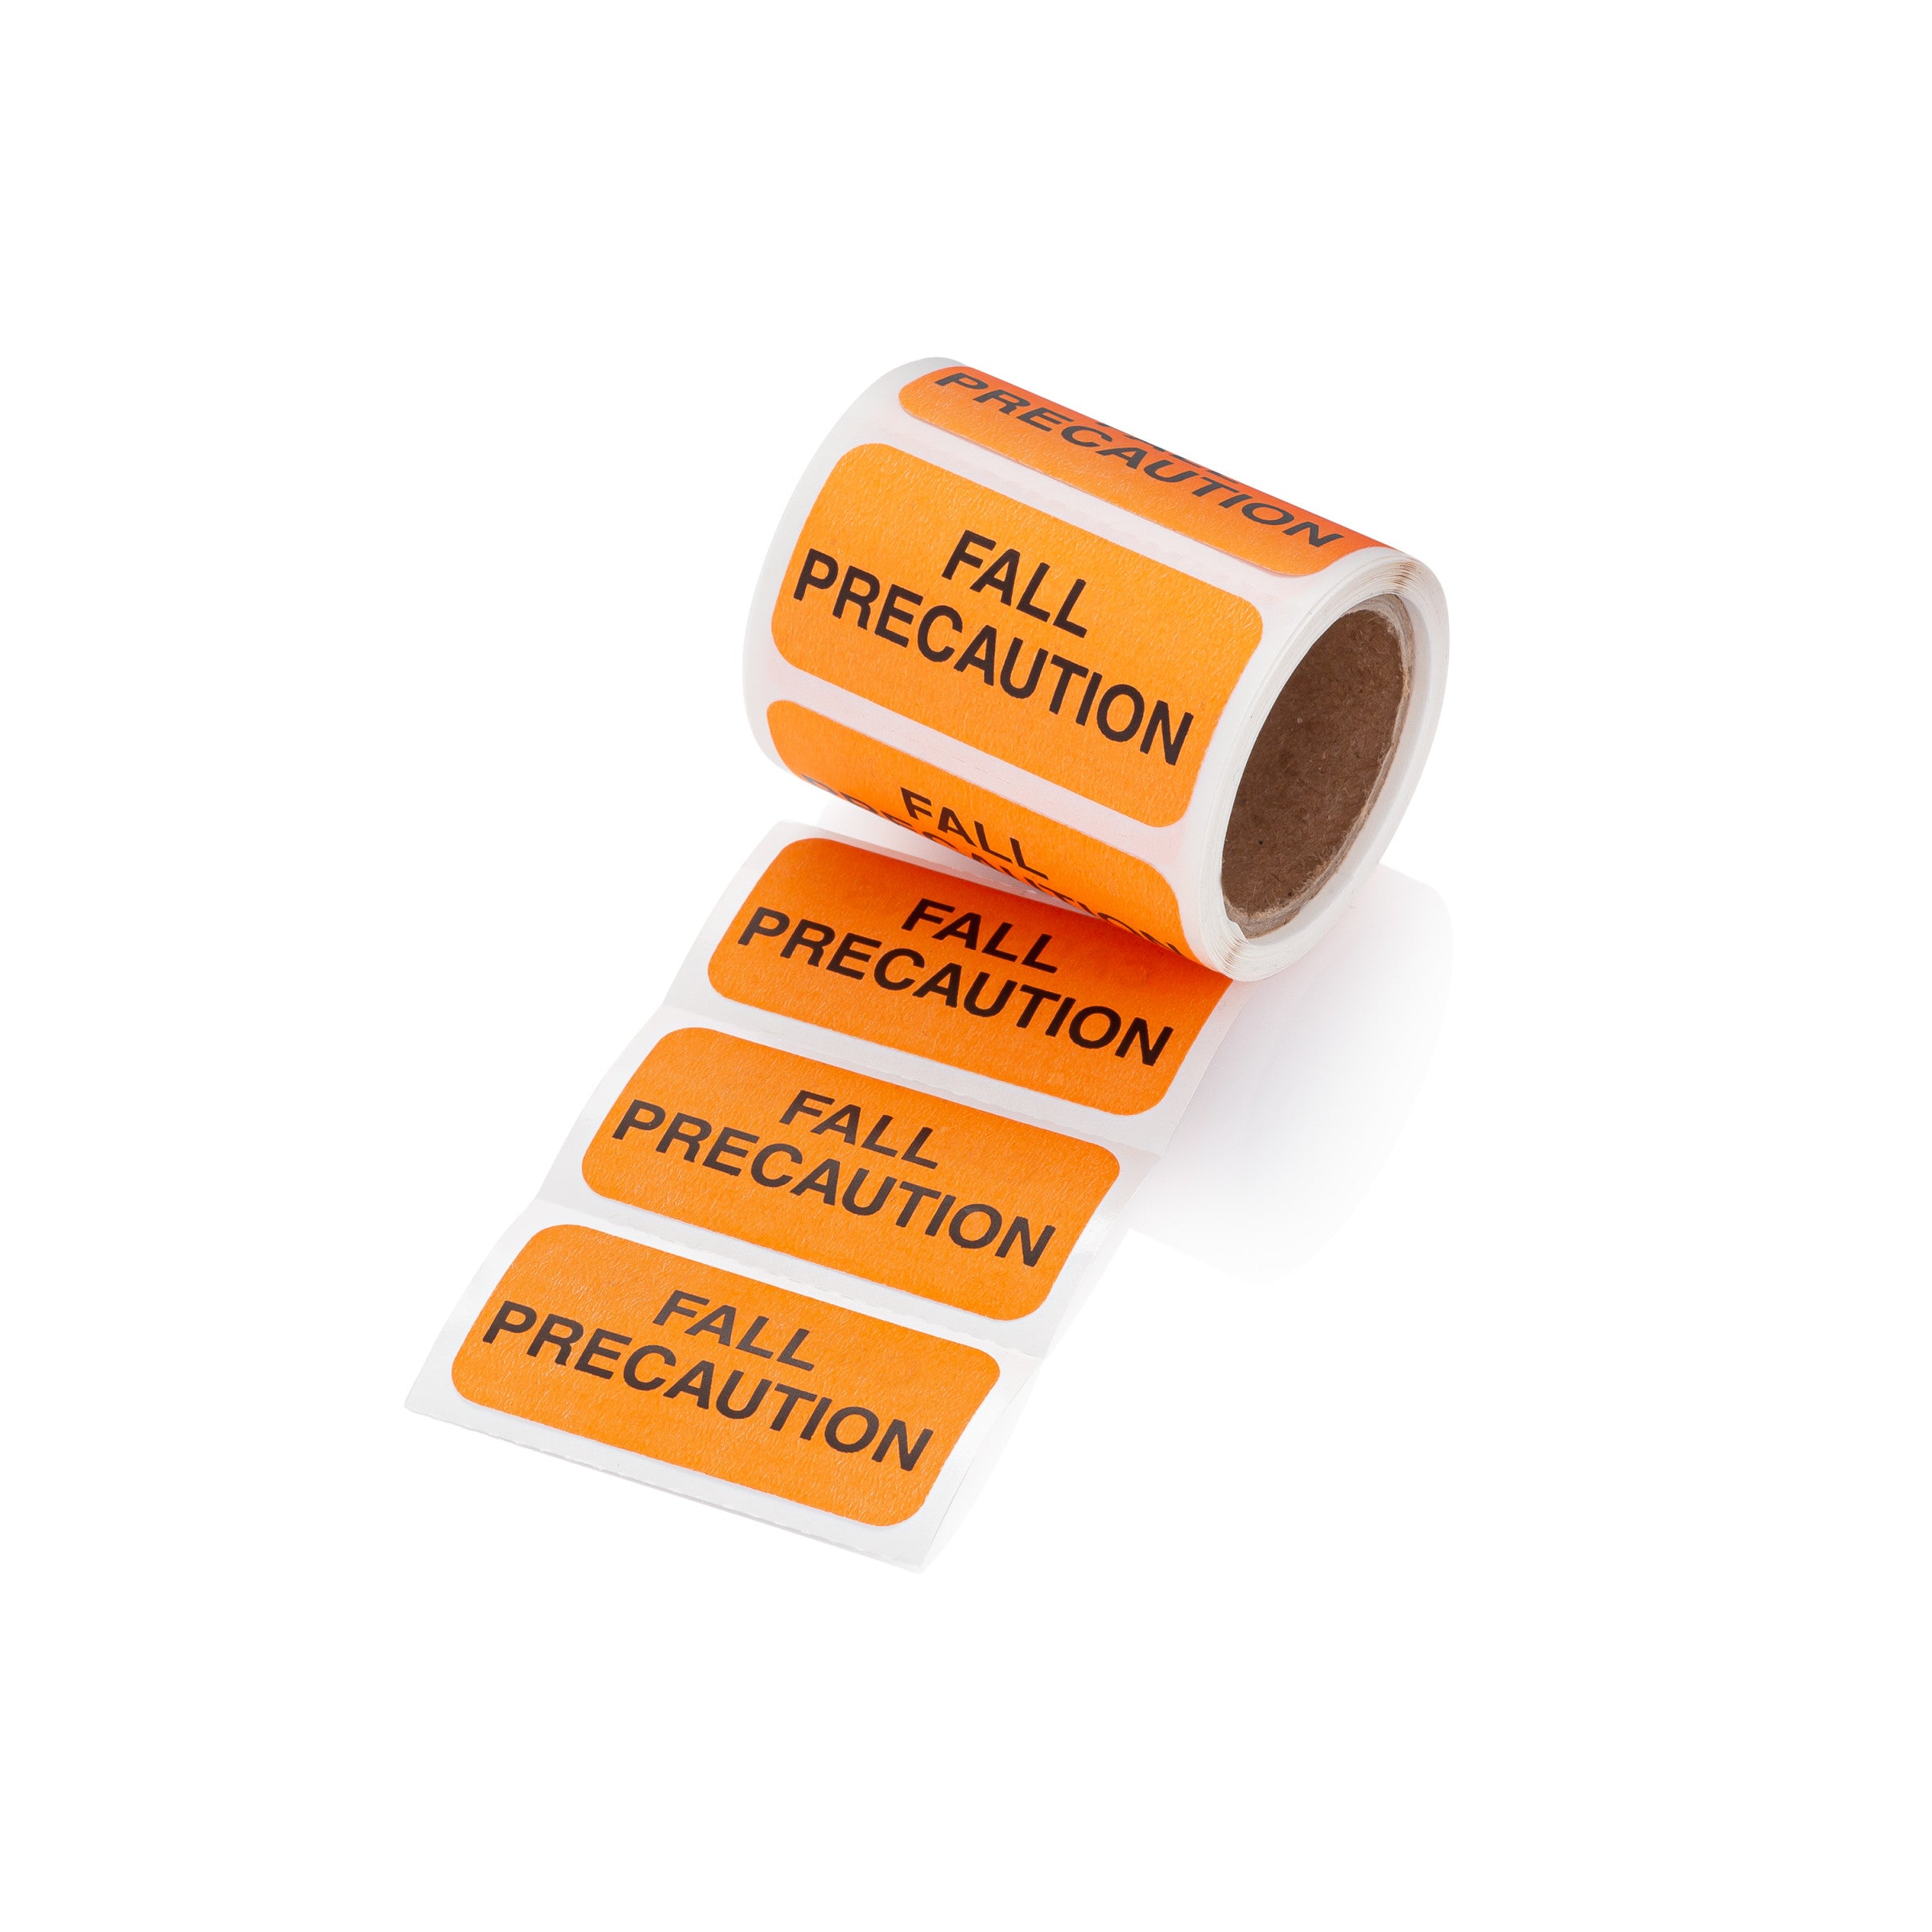 Fall Precaution Alert and Instruction Labels, Orange, W1.5" x H.75" (Roll of 100)